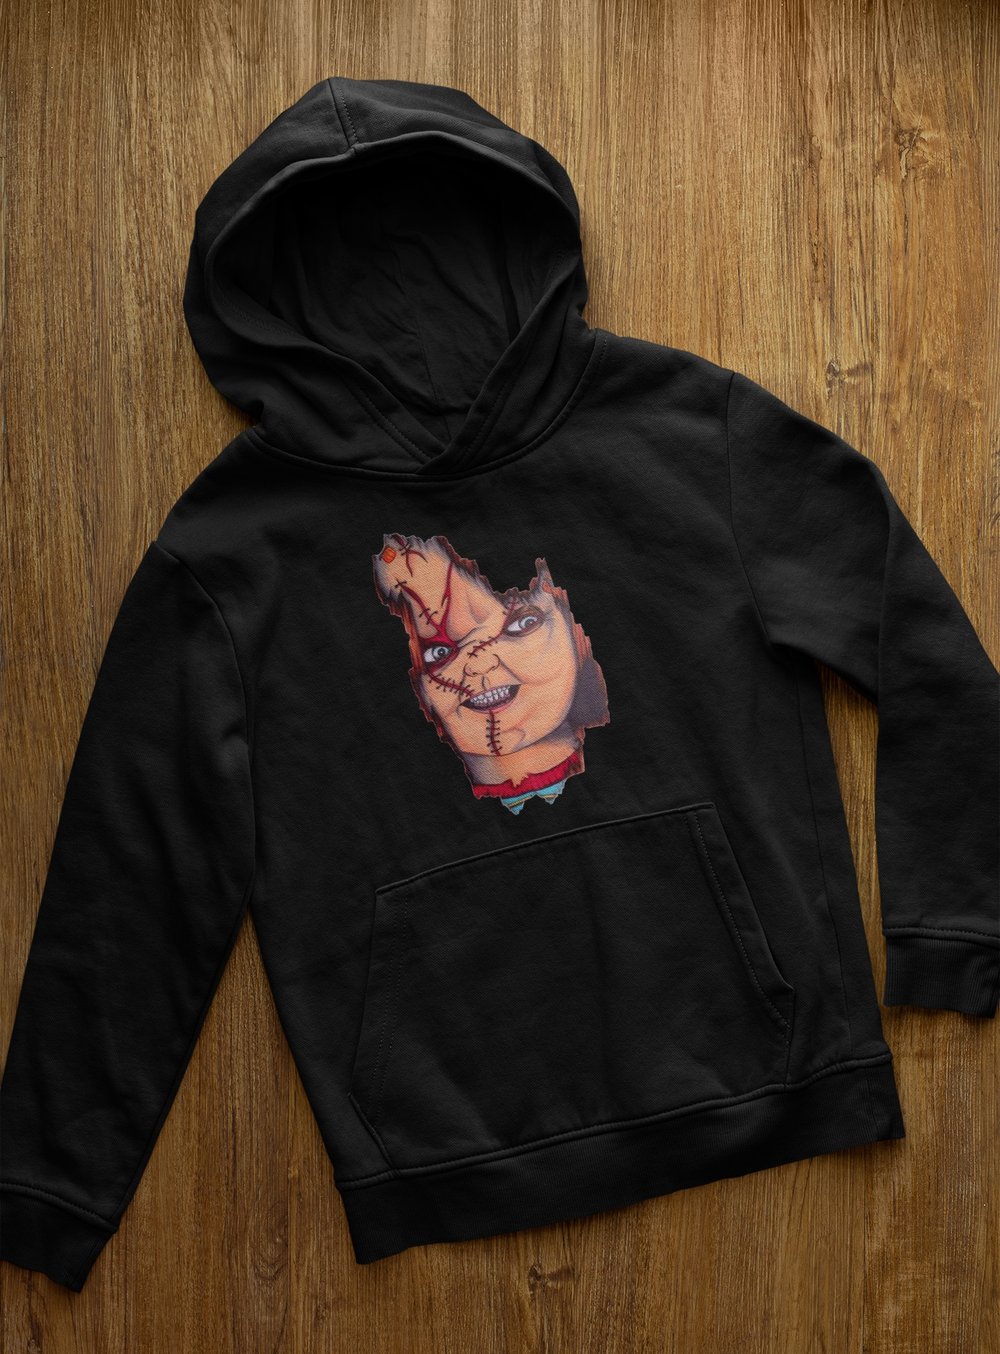 Nightmares CHCKY  (HOODY ONLY) 